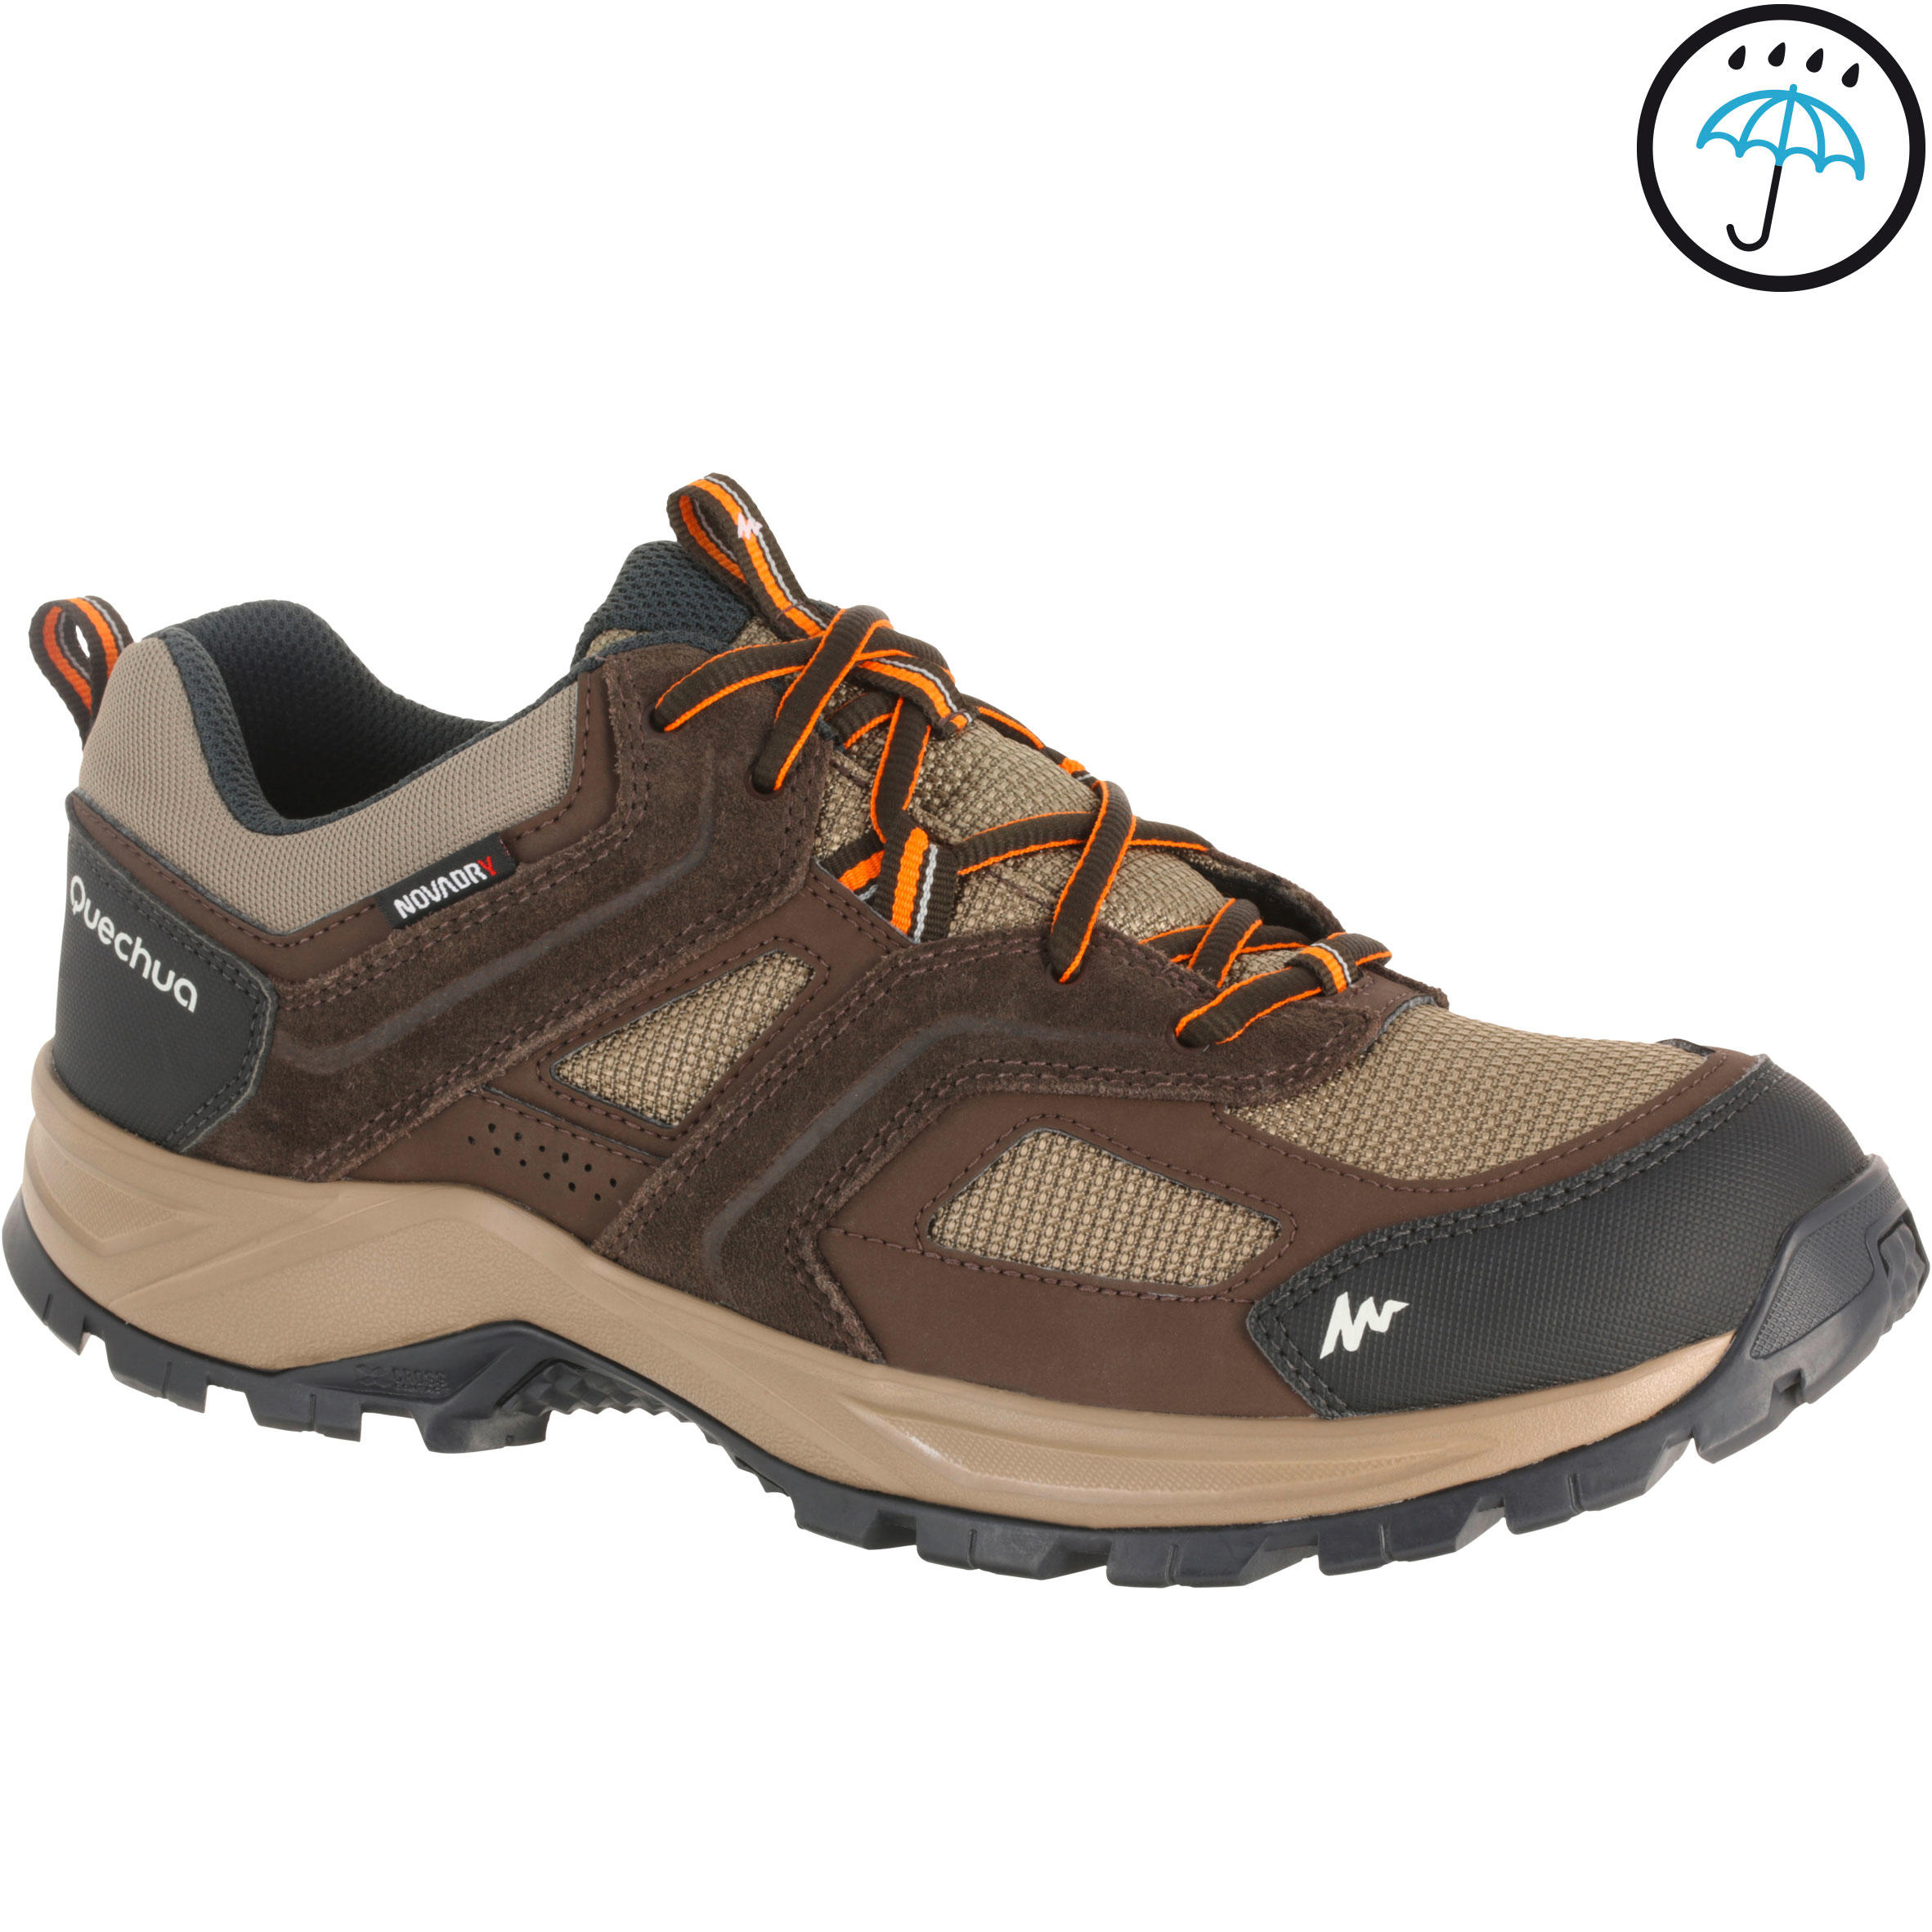 QUECHUA Forclaz 100 Male Waterproof Hiking Boot - Brown